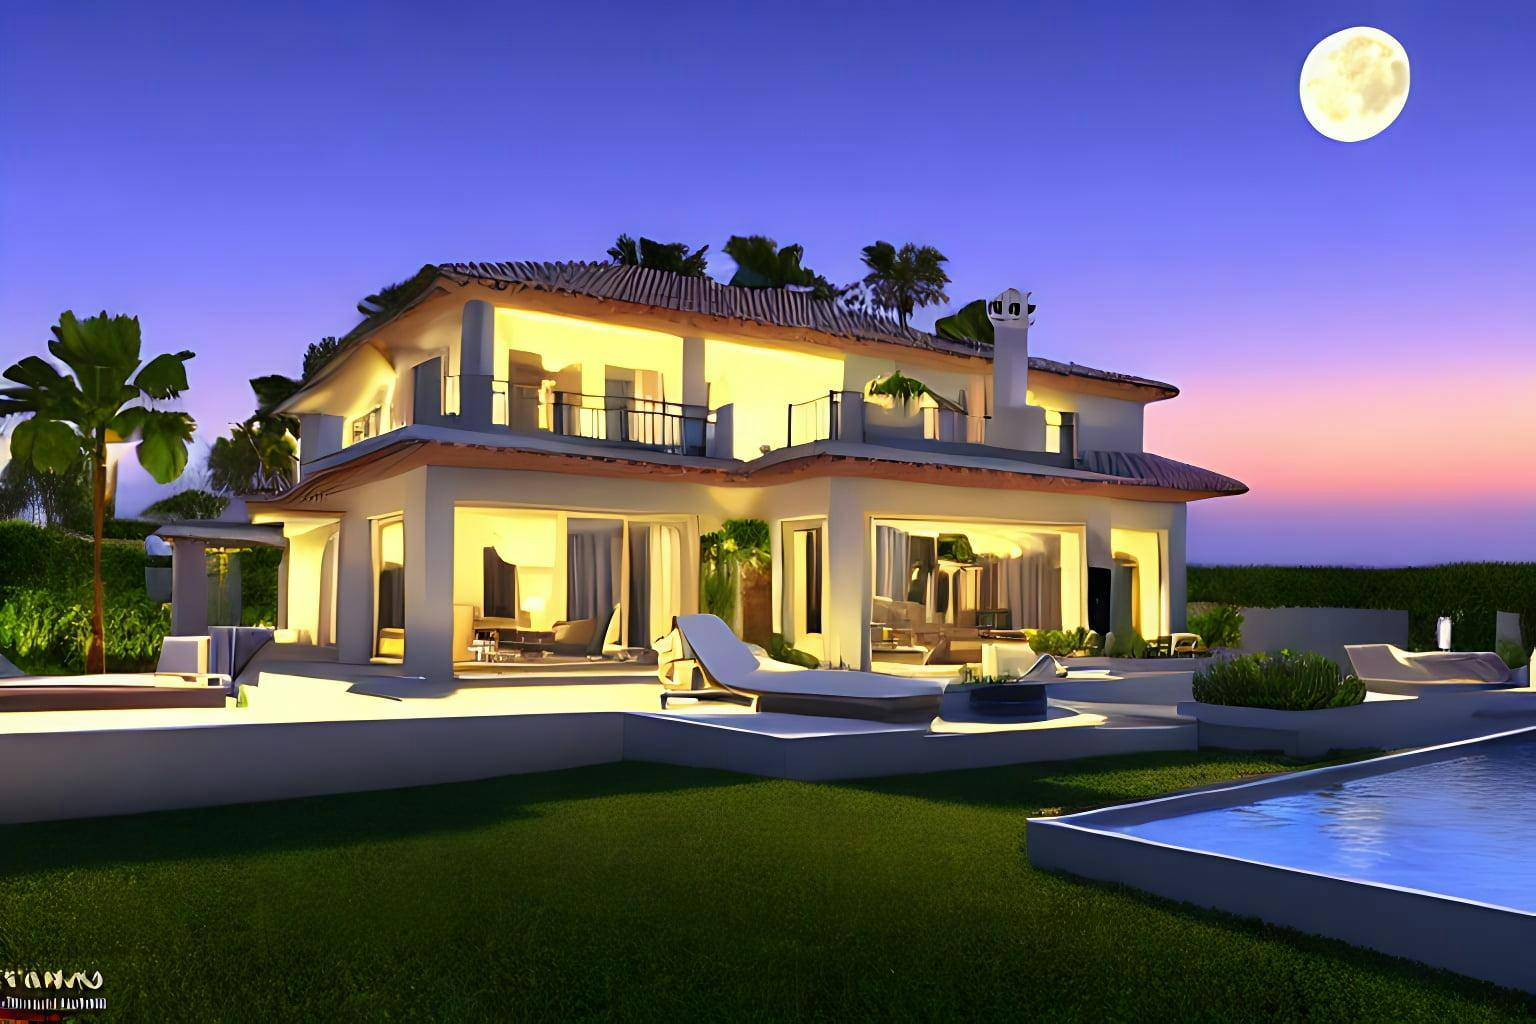 Photorealistic Very Detailed Villa At The Coast With Moon In The Background Breaking Light